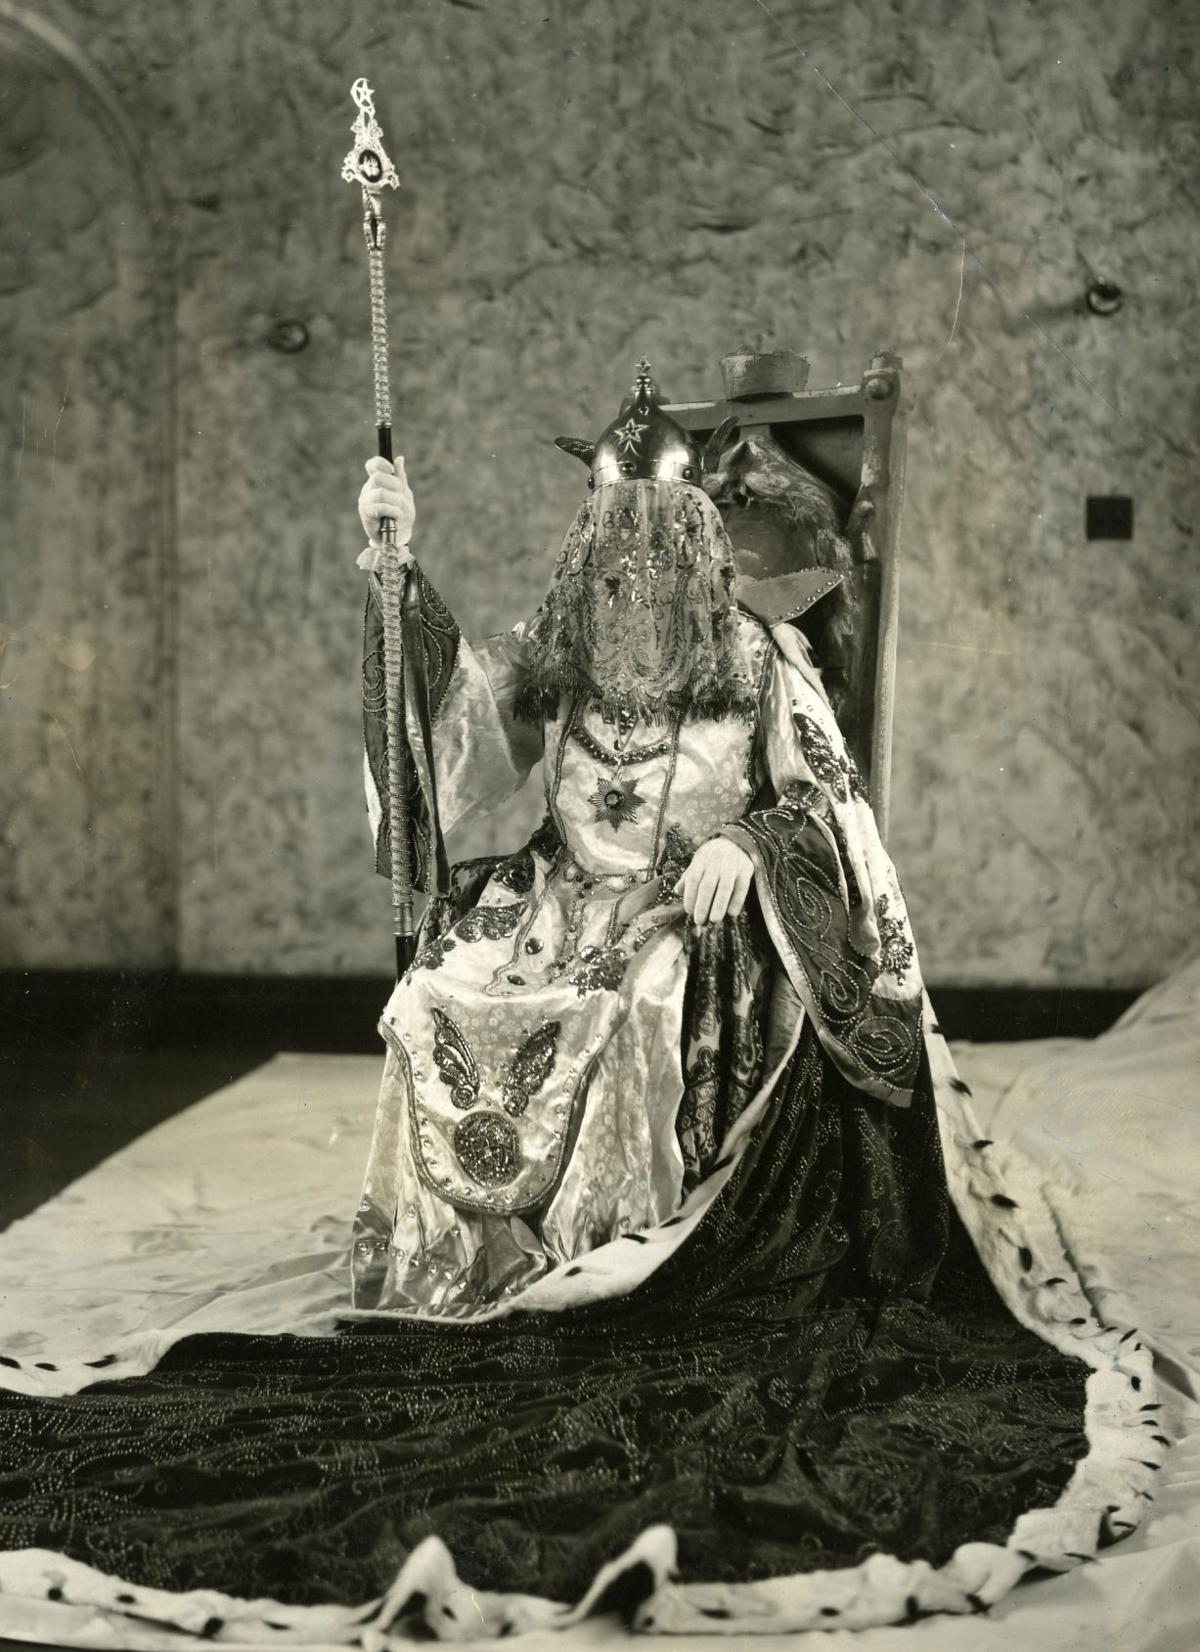 Photo of the veiled prophet from 1938, from the St. Louis Post-Dispatch archives